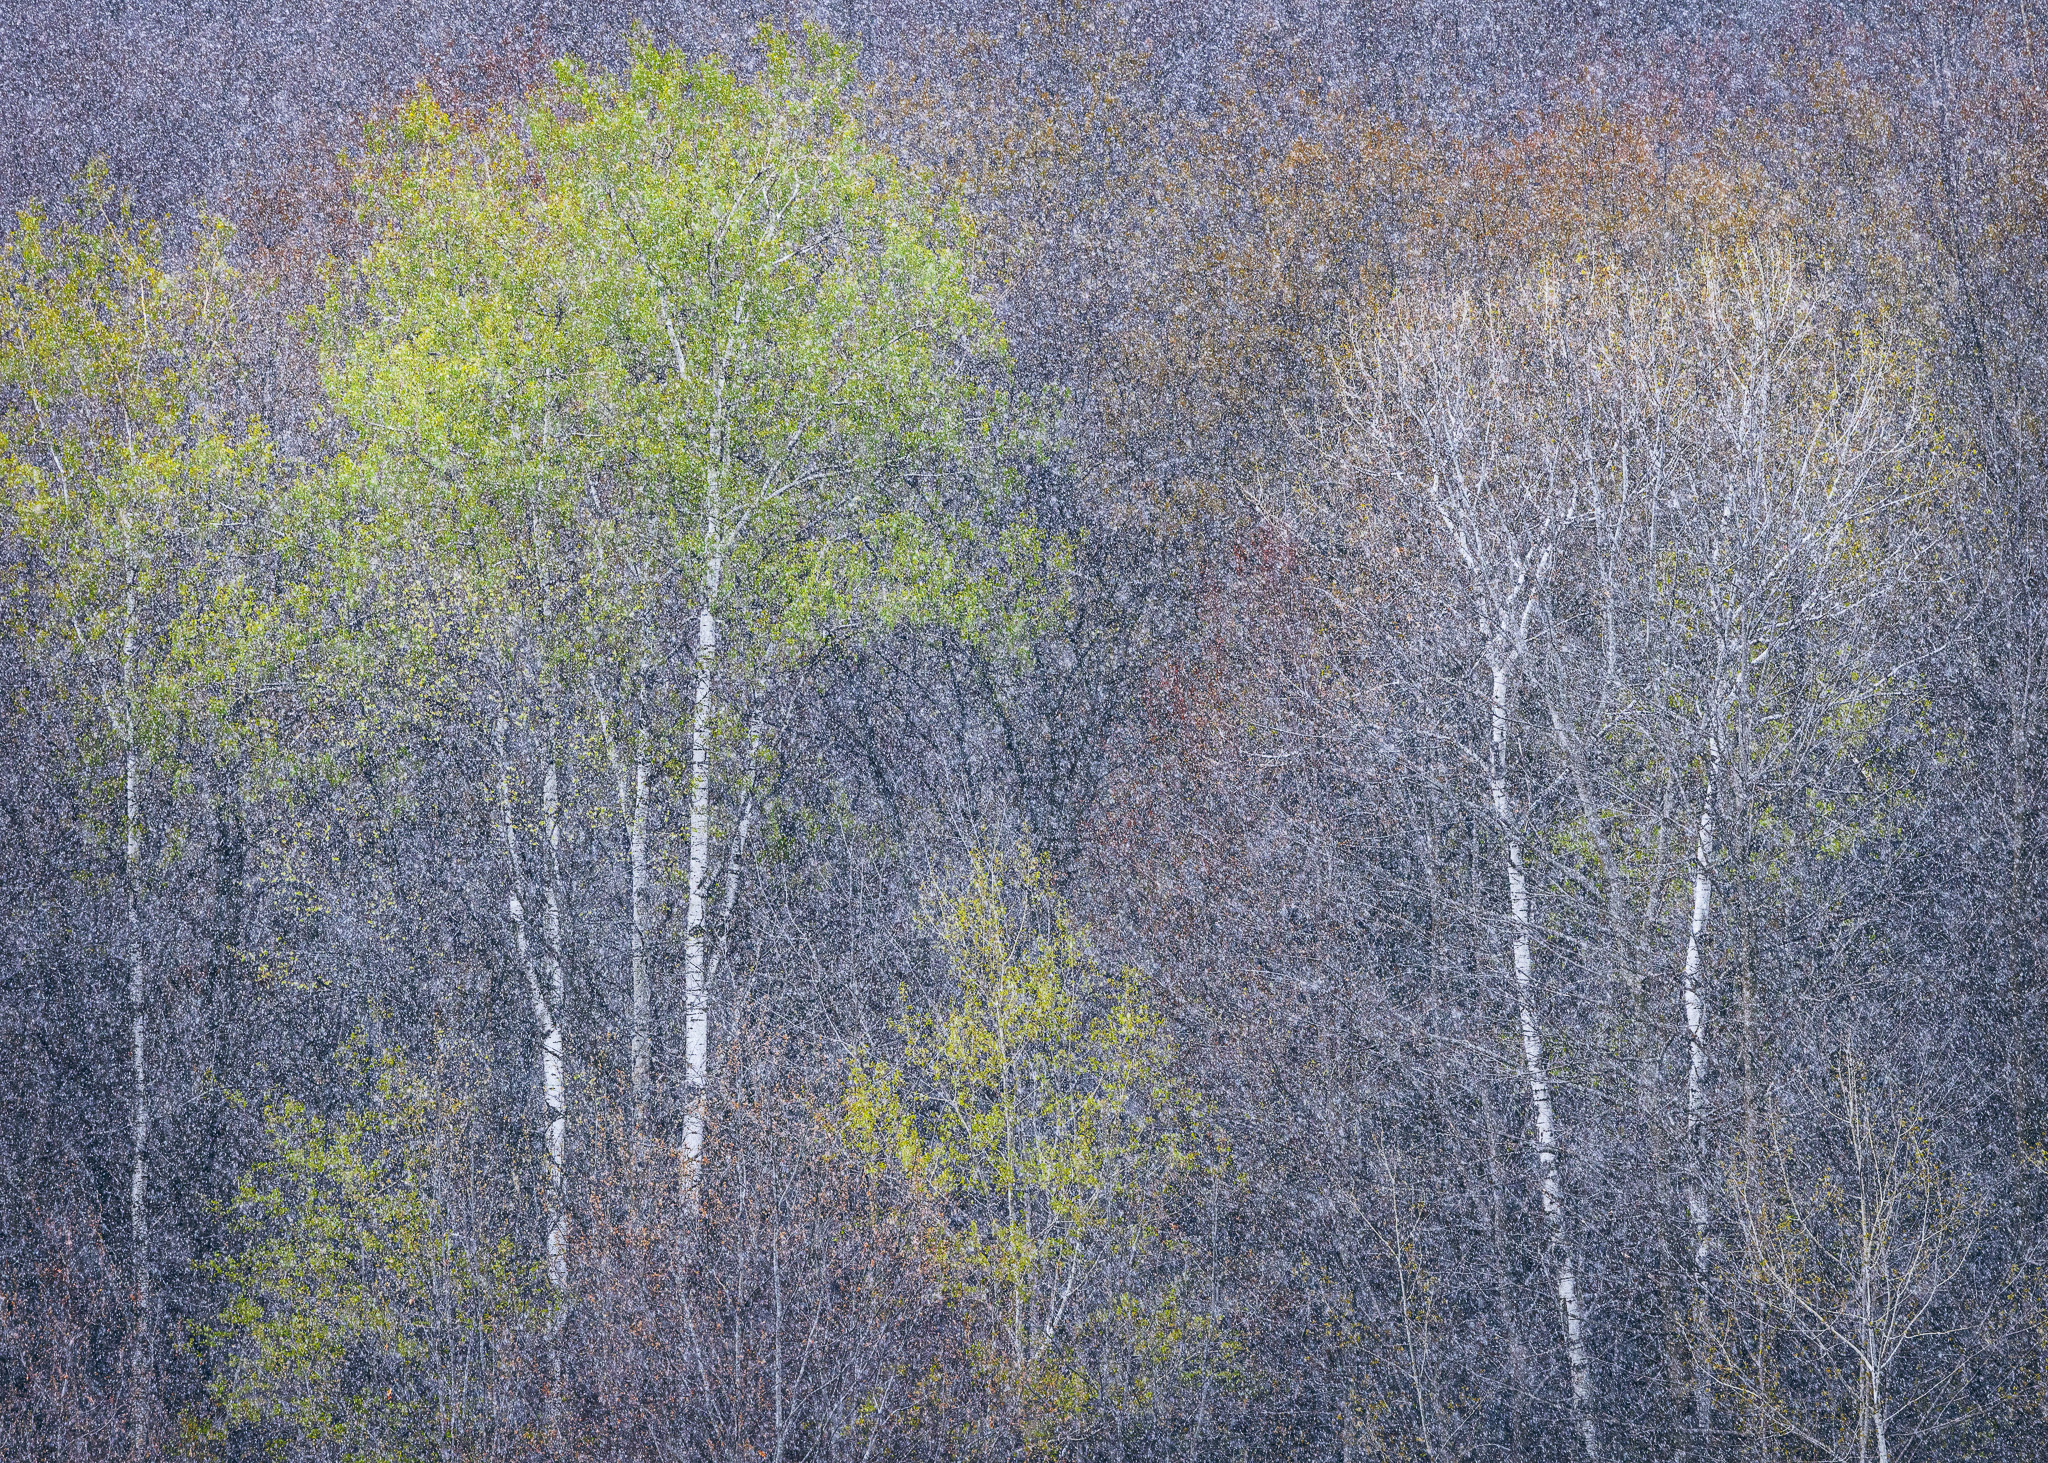 Forest of trees with snow falling creating a pixelated look